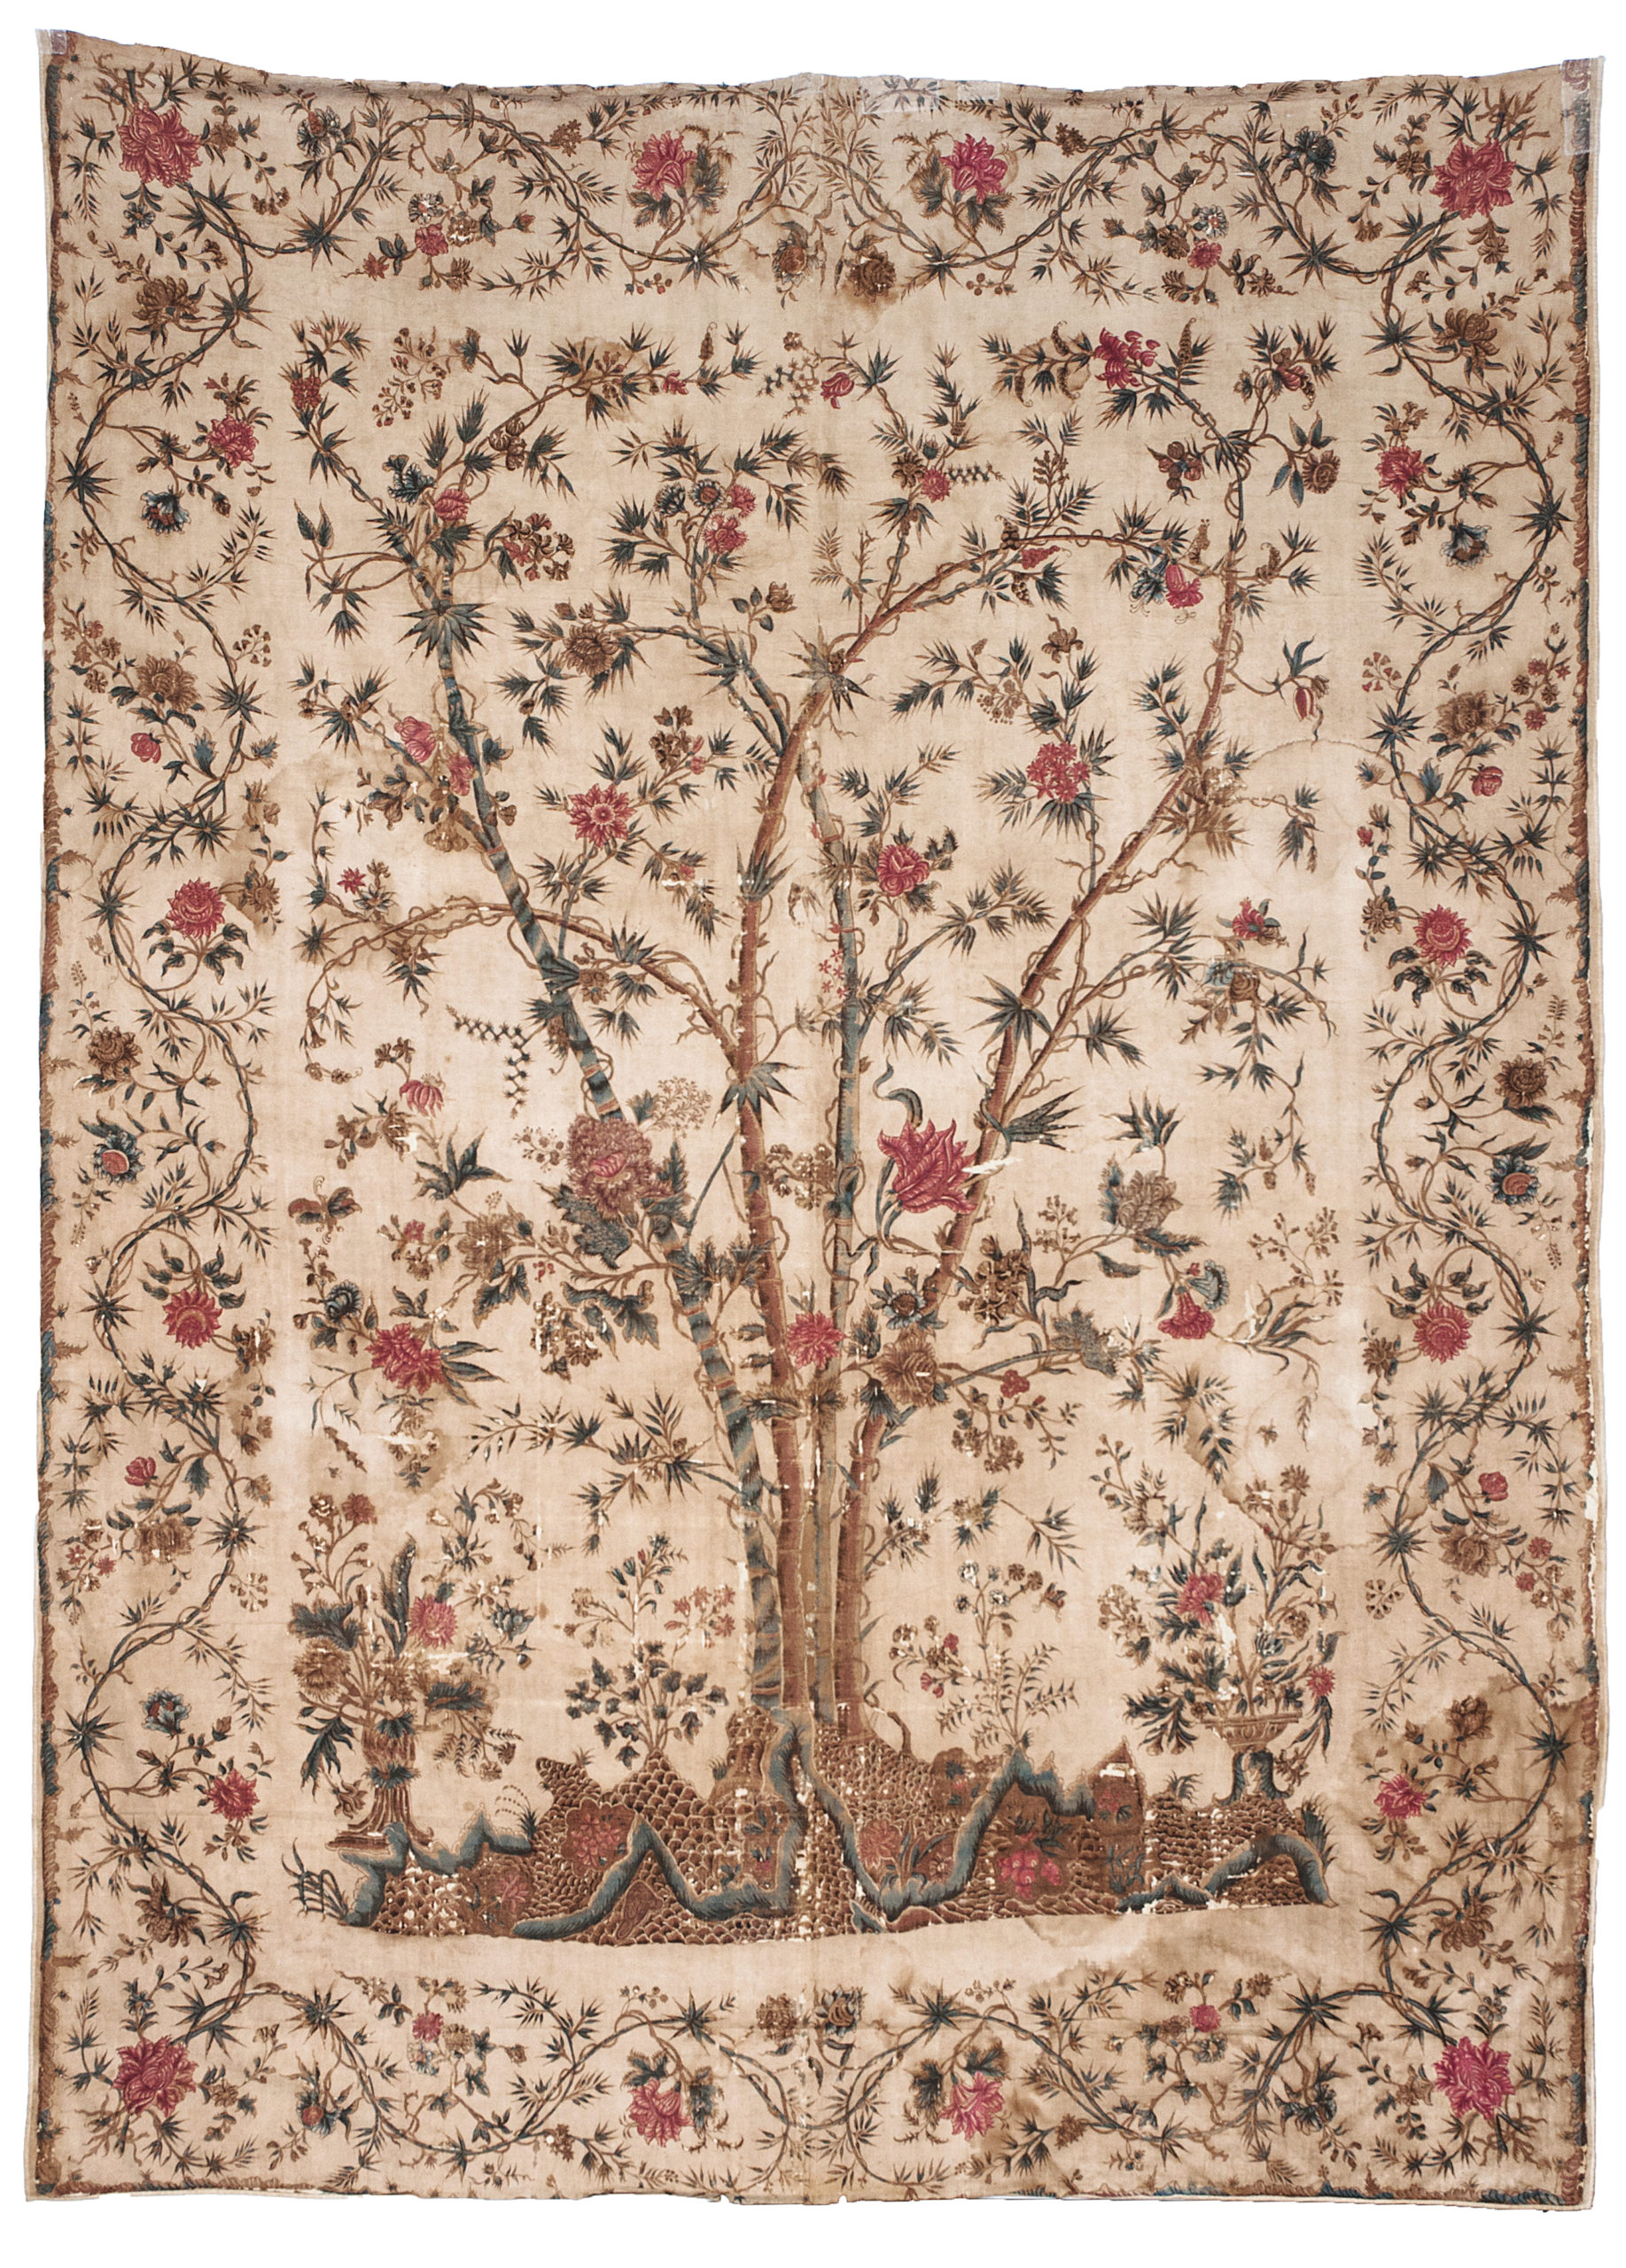 Chintz: A Quilted History